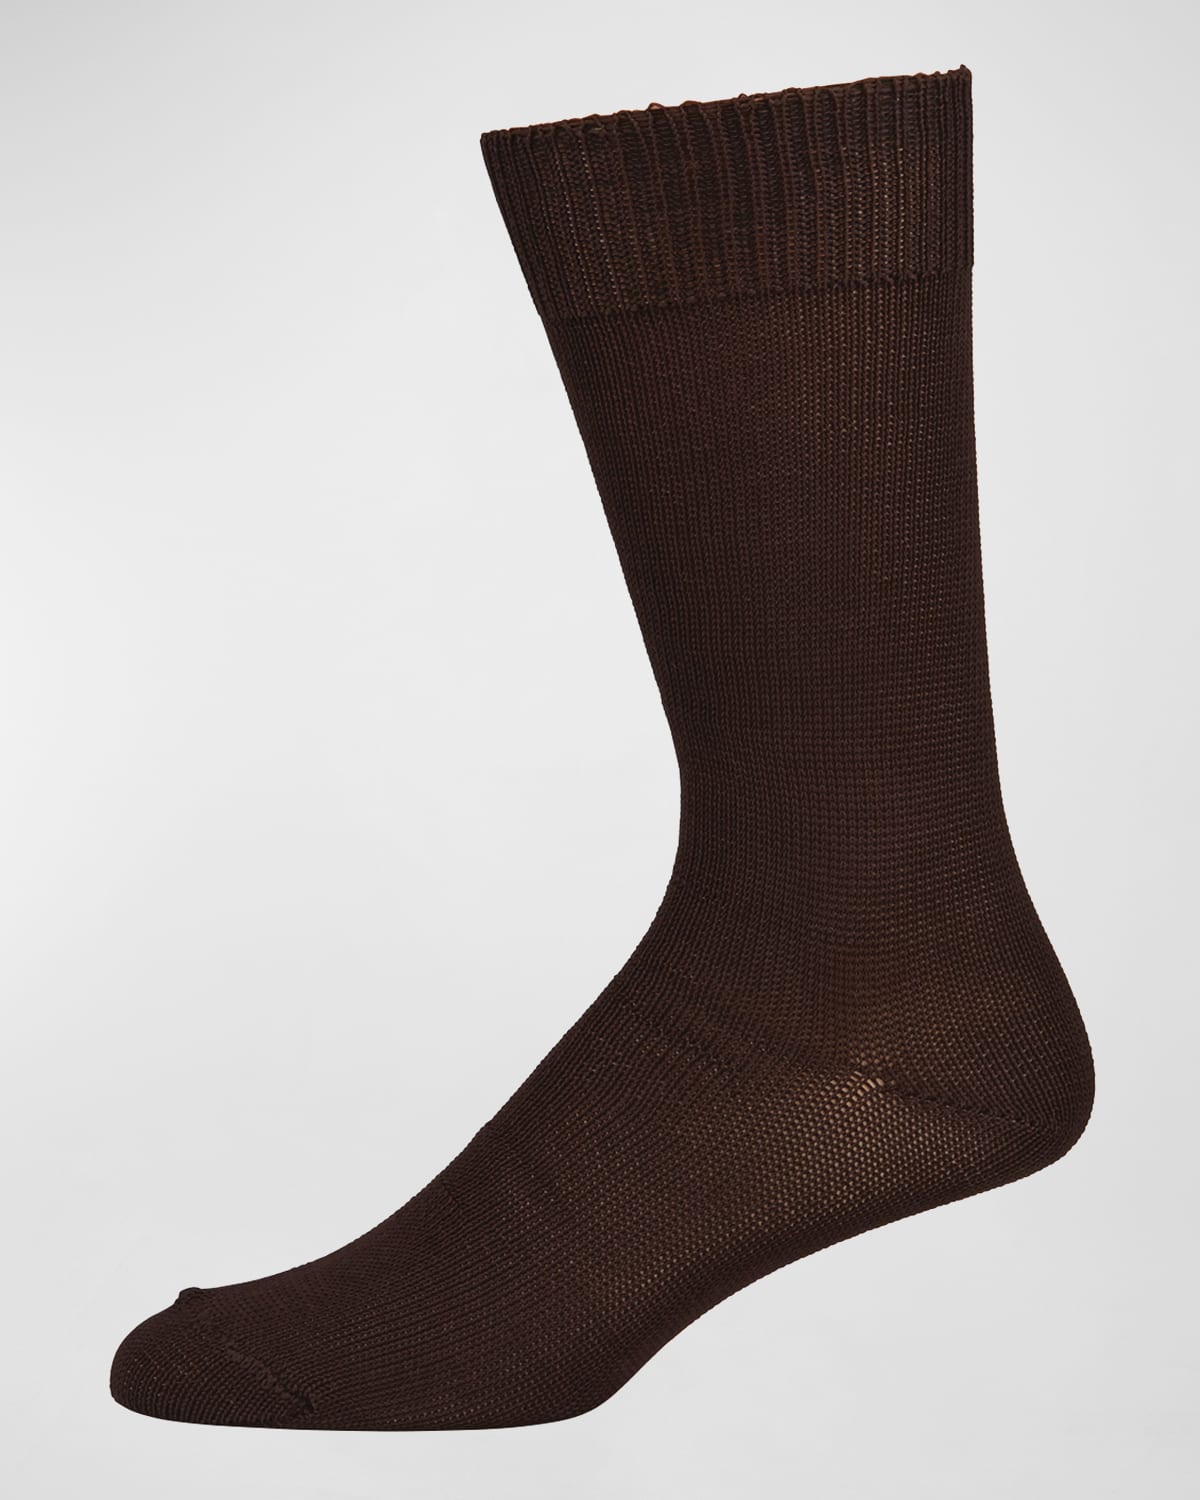 Neiman Marcus Men's Casual Cotton-blend Knit Socks In Brown